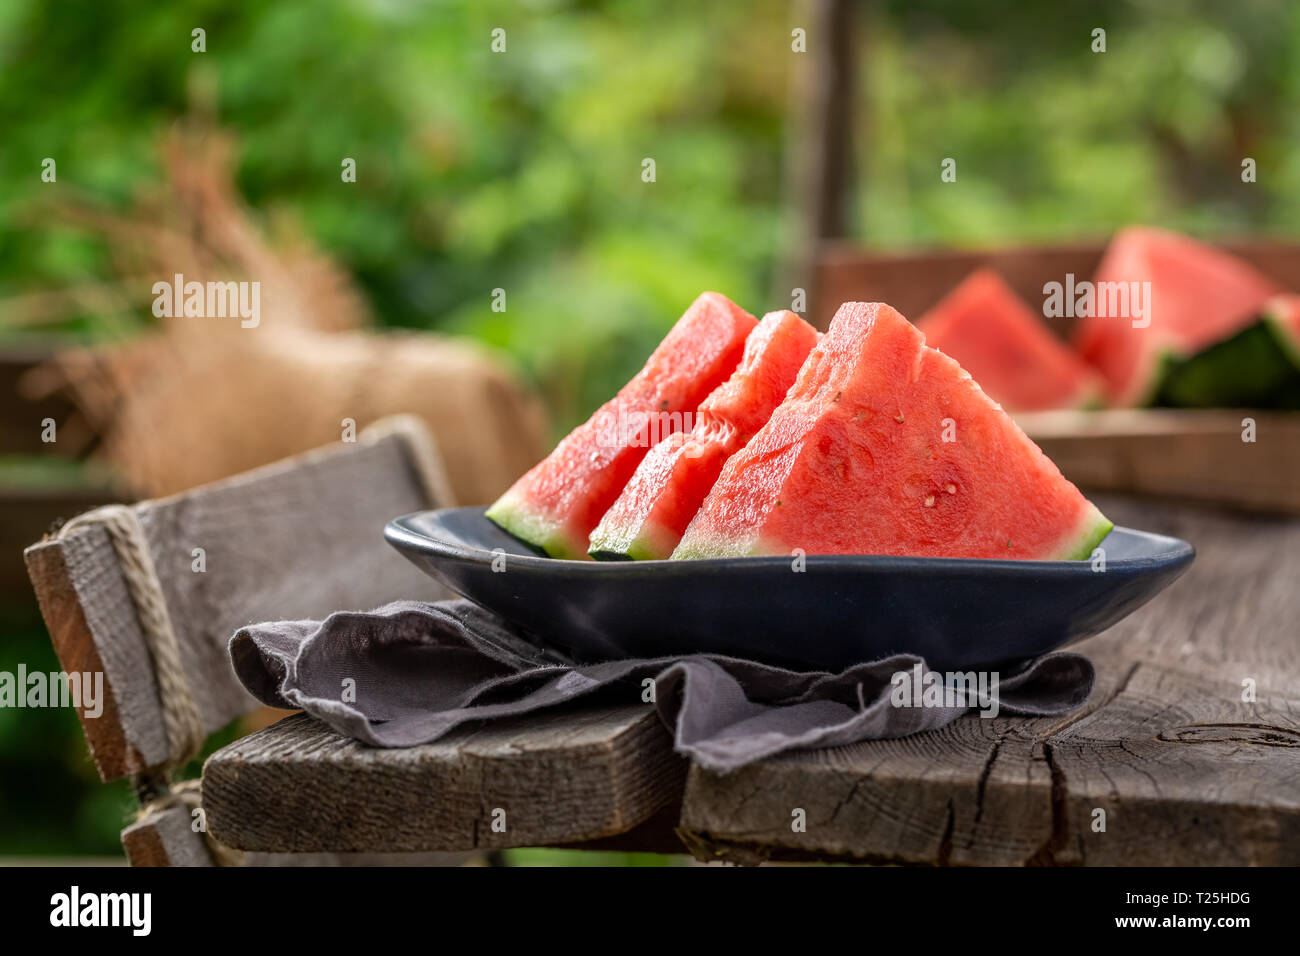 Delicious and jucy watermelon in summer garden Stock Photo